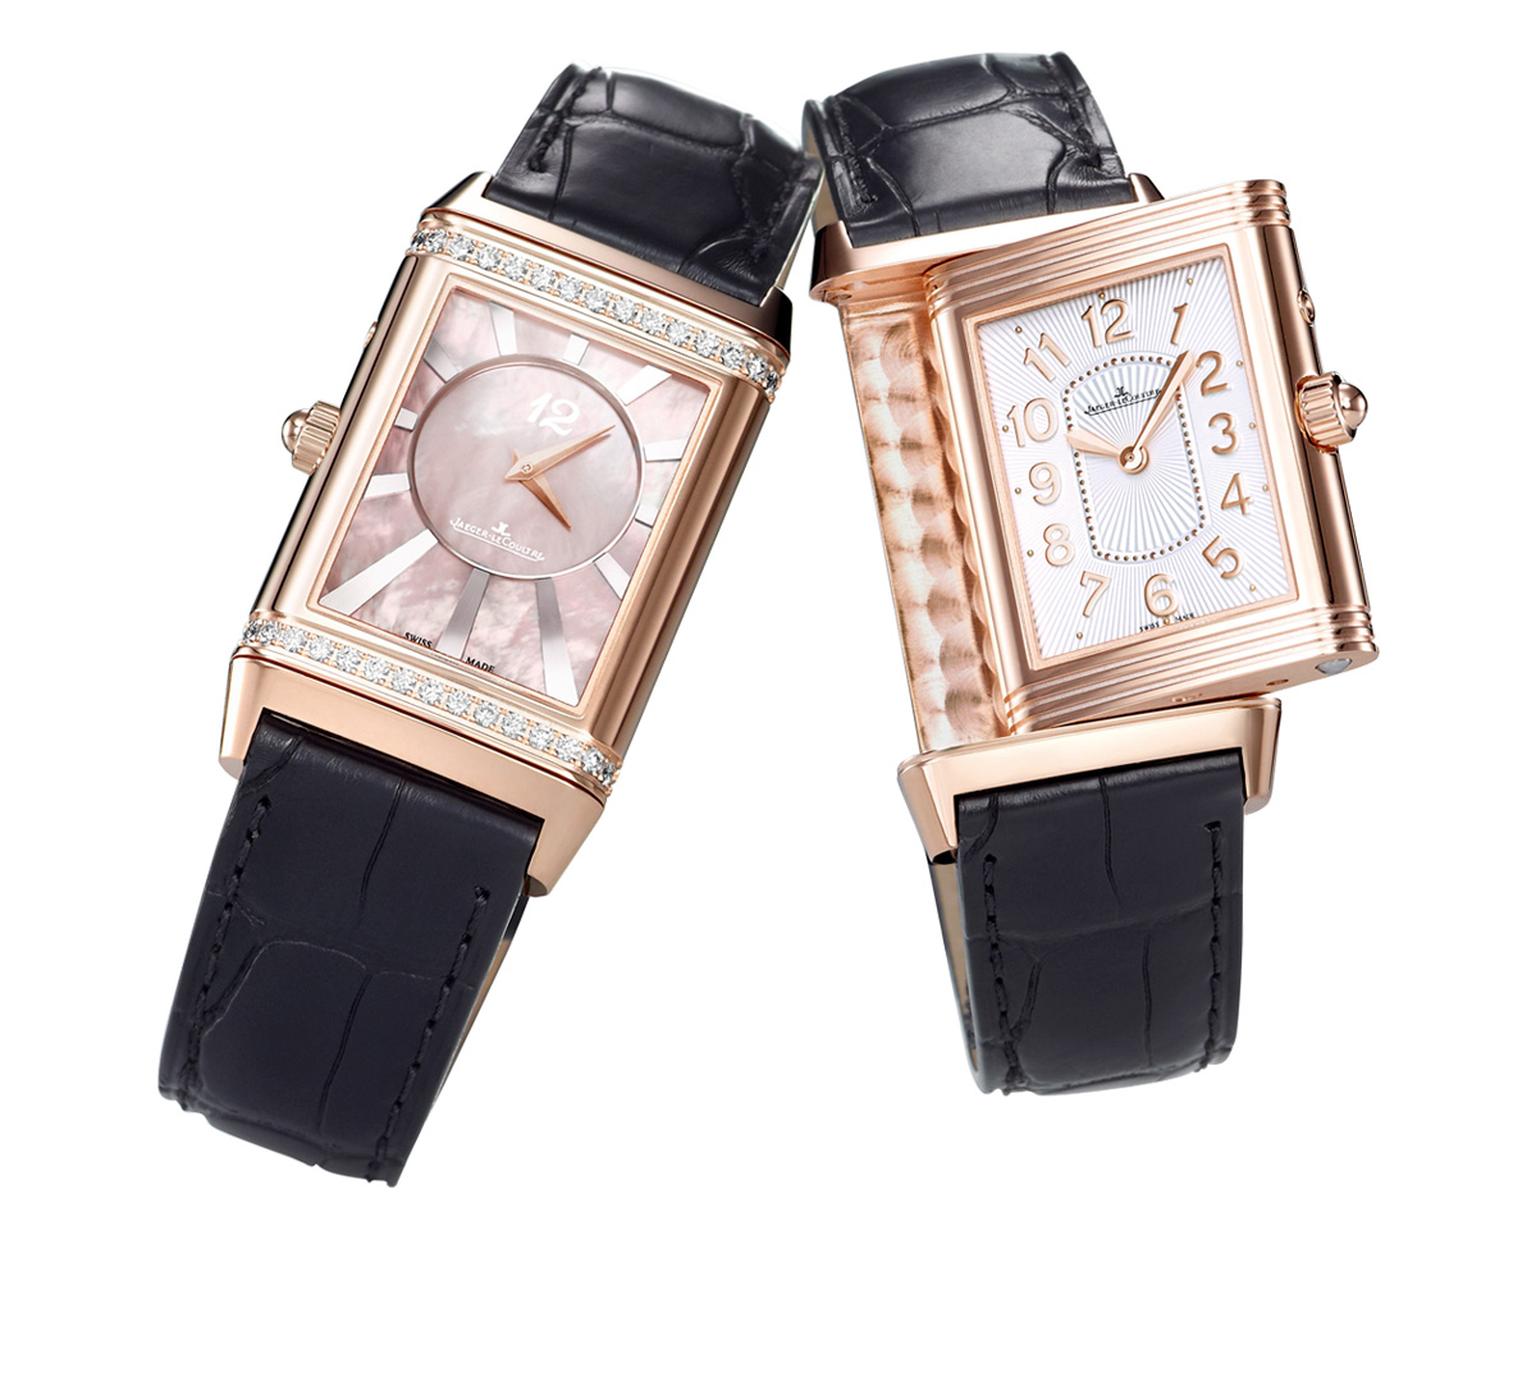 Jaeger-LeCoultre Grande Reverso Lady Ultra Thin Duetto Duo_20140103_Zoom